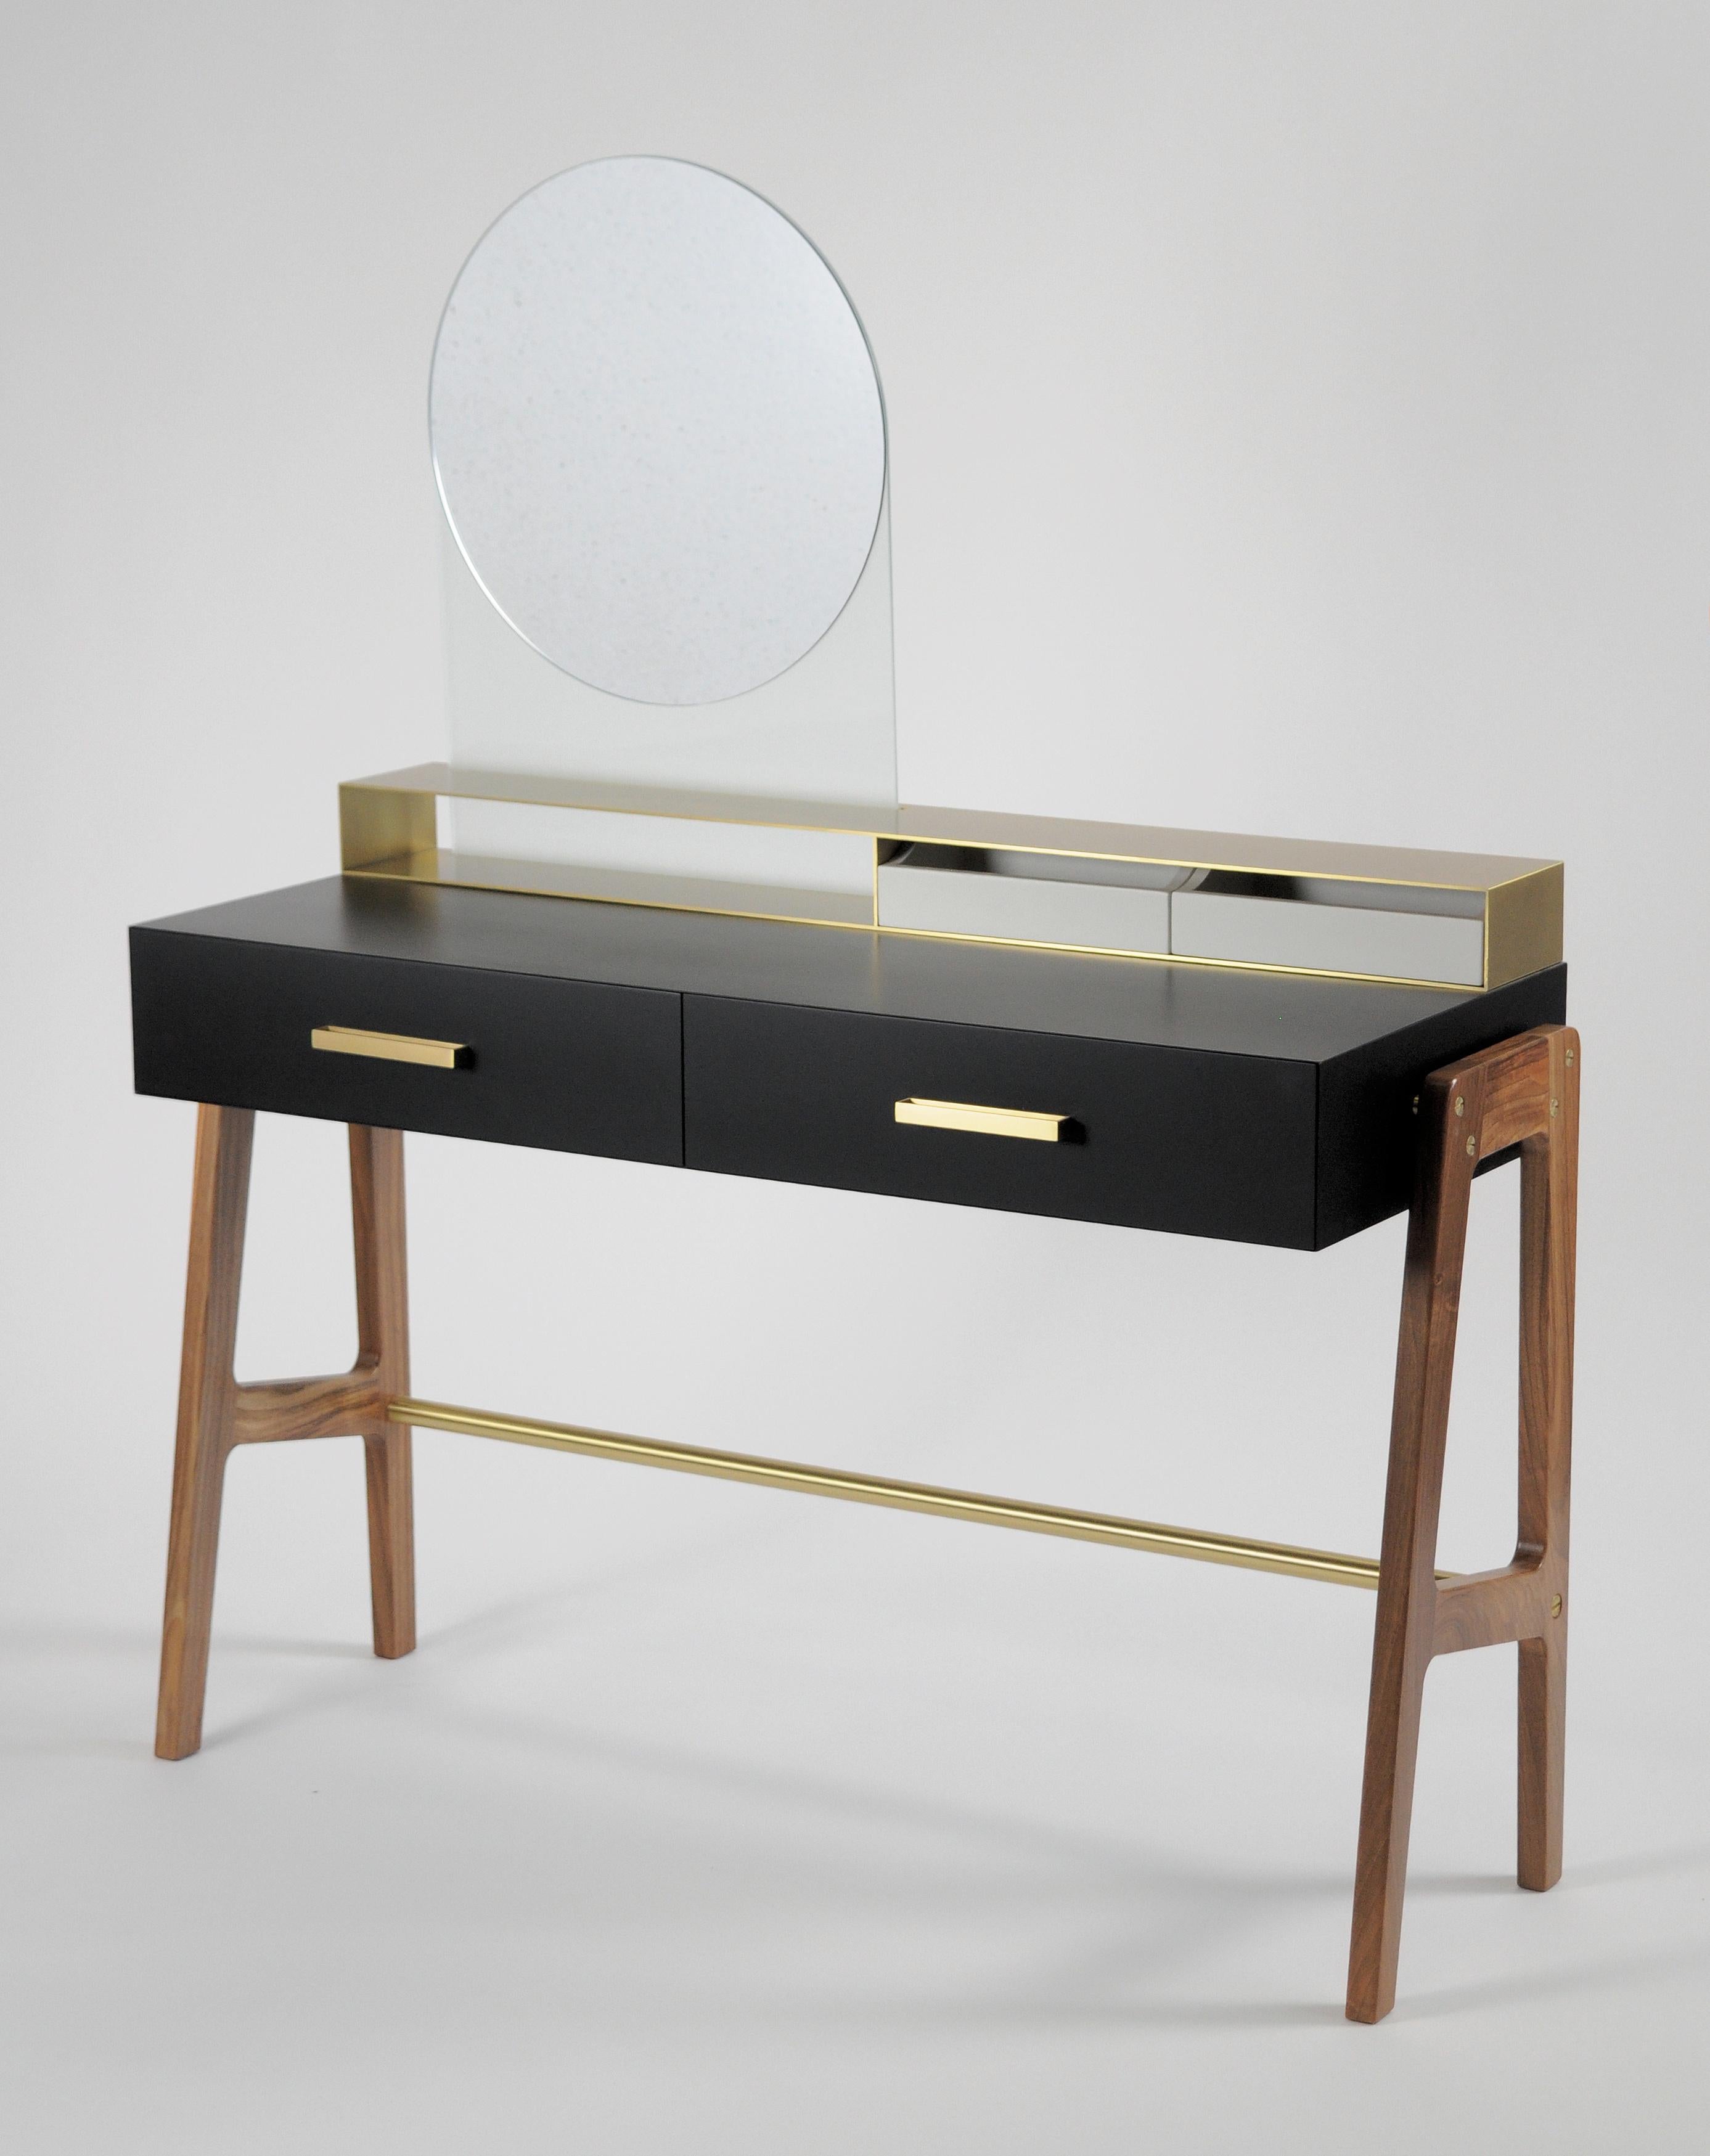 Contemporary Beauty Desk, Makeup Table, Jewel Case, Mirror. Lacquered Oak, Brass In New Condition For Sale In Meolo, Venezia